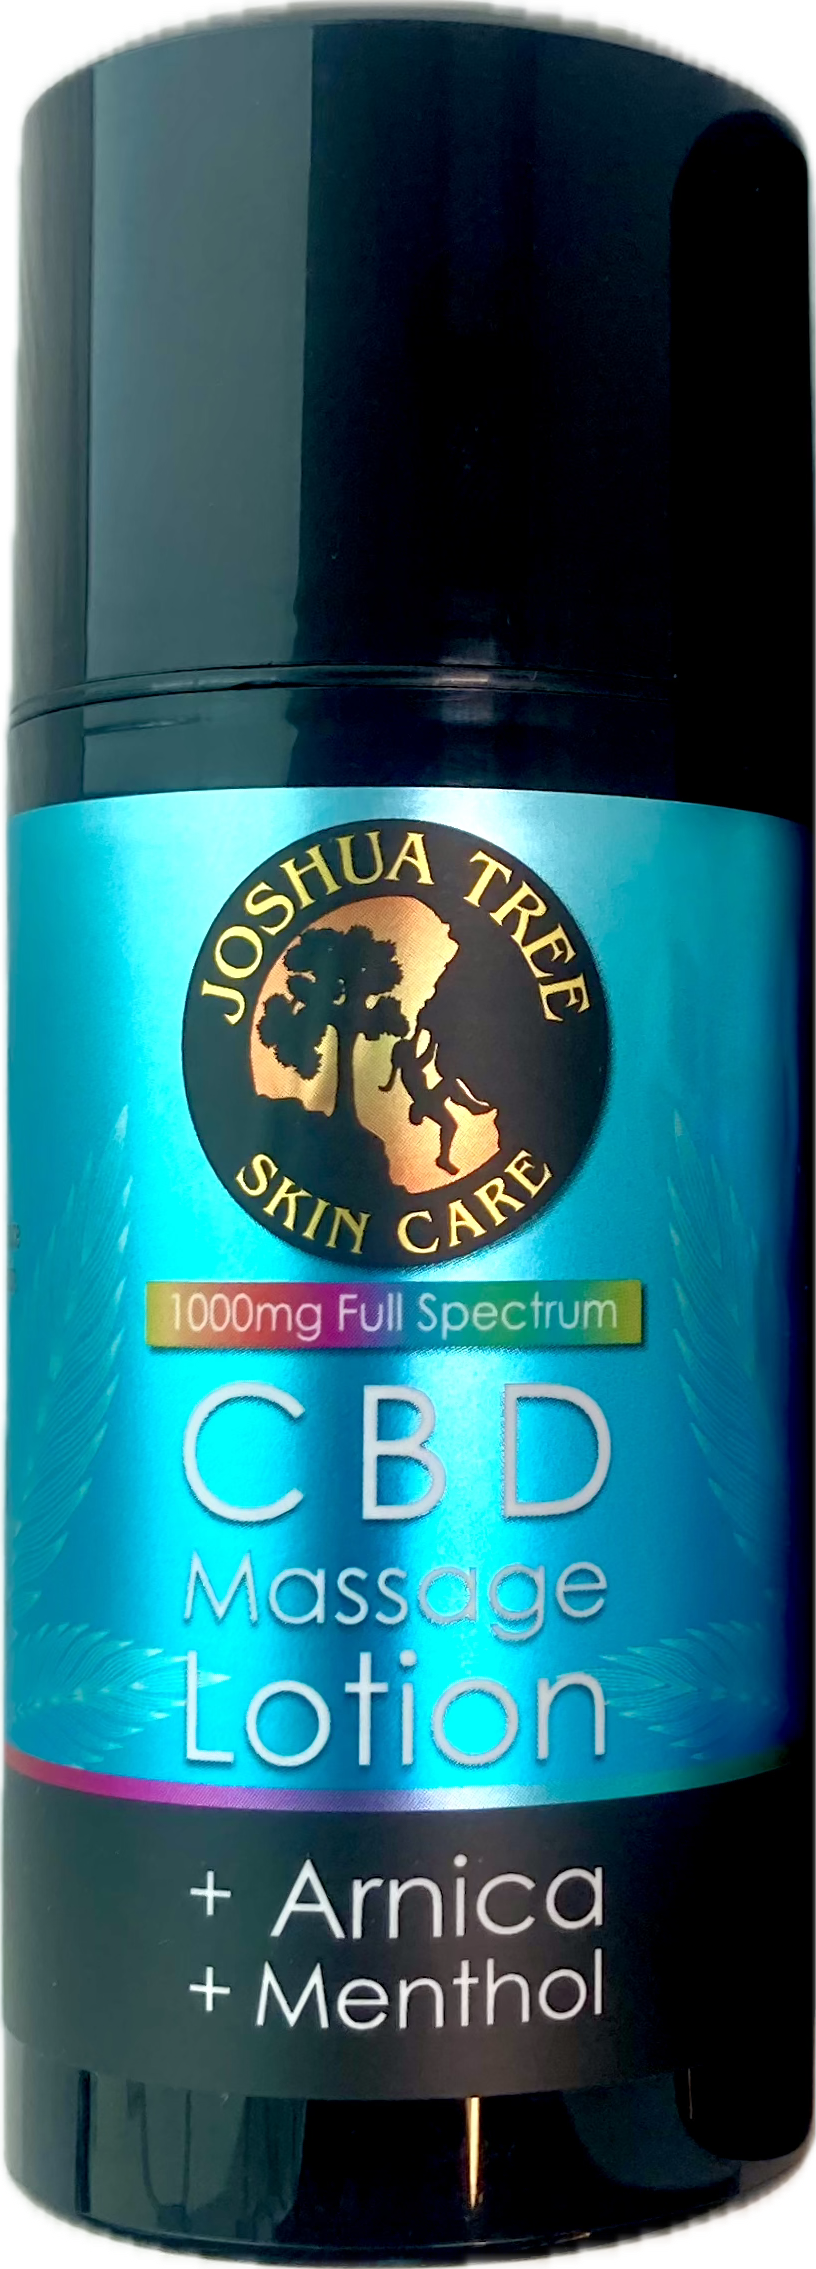 Full spectrum 1000mg CBD massage lotion with arnica and menthol